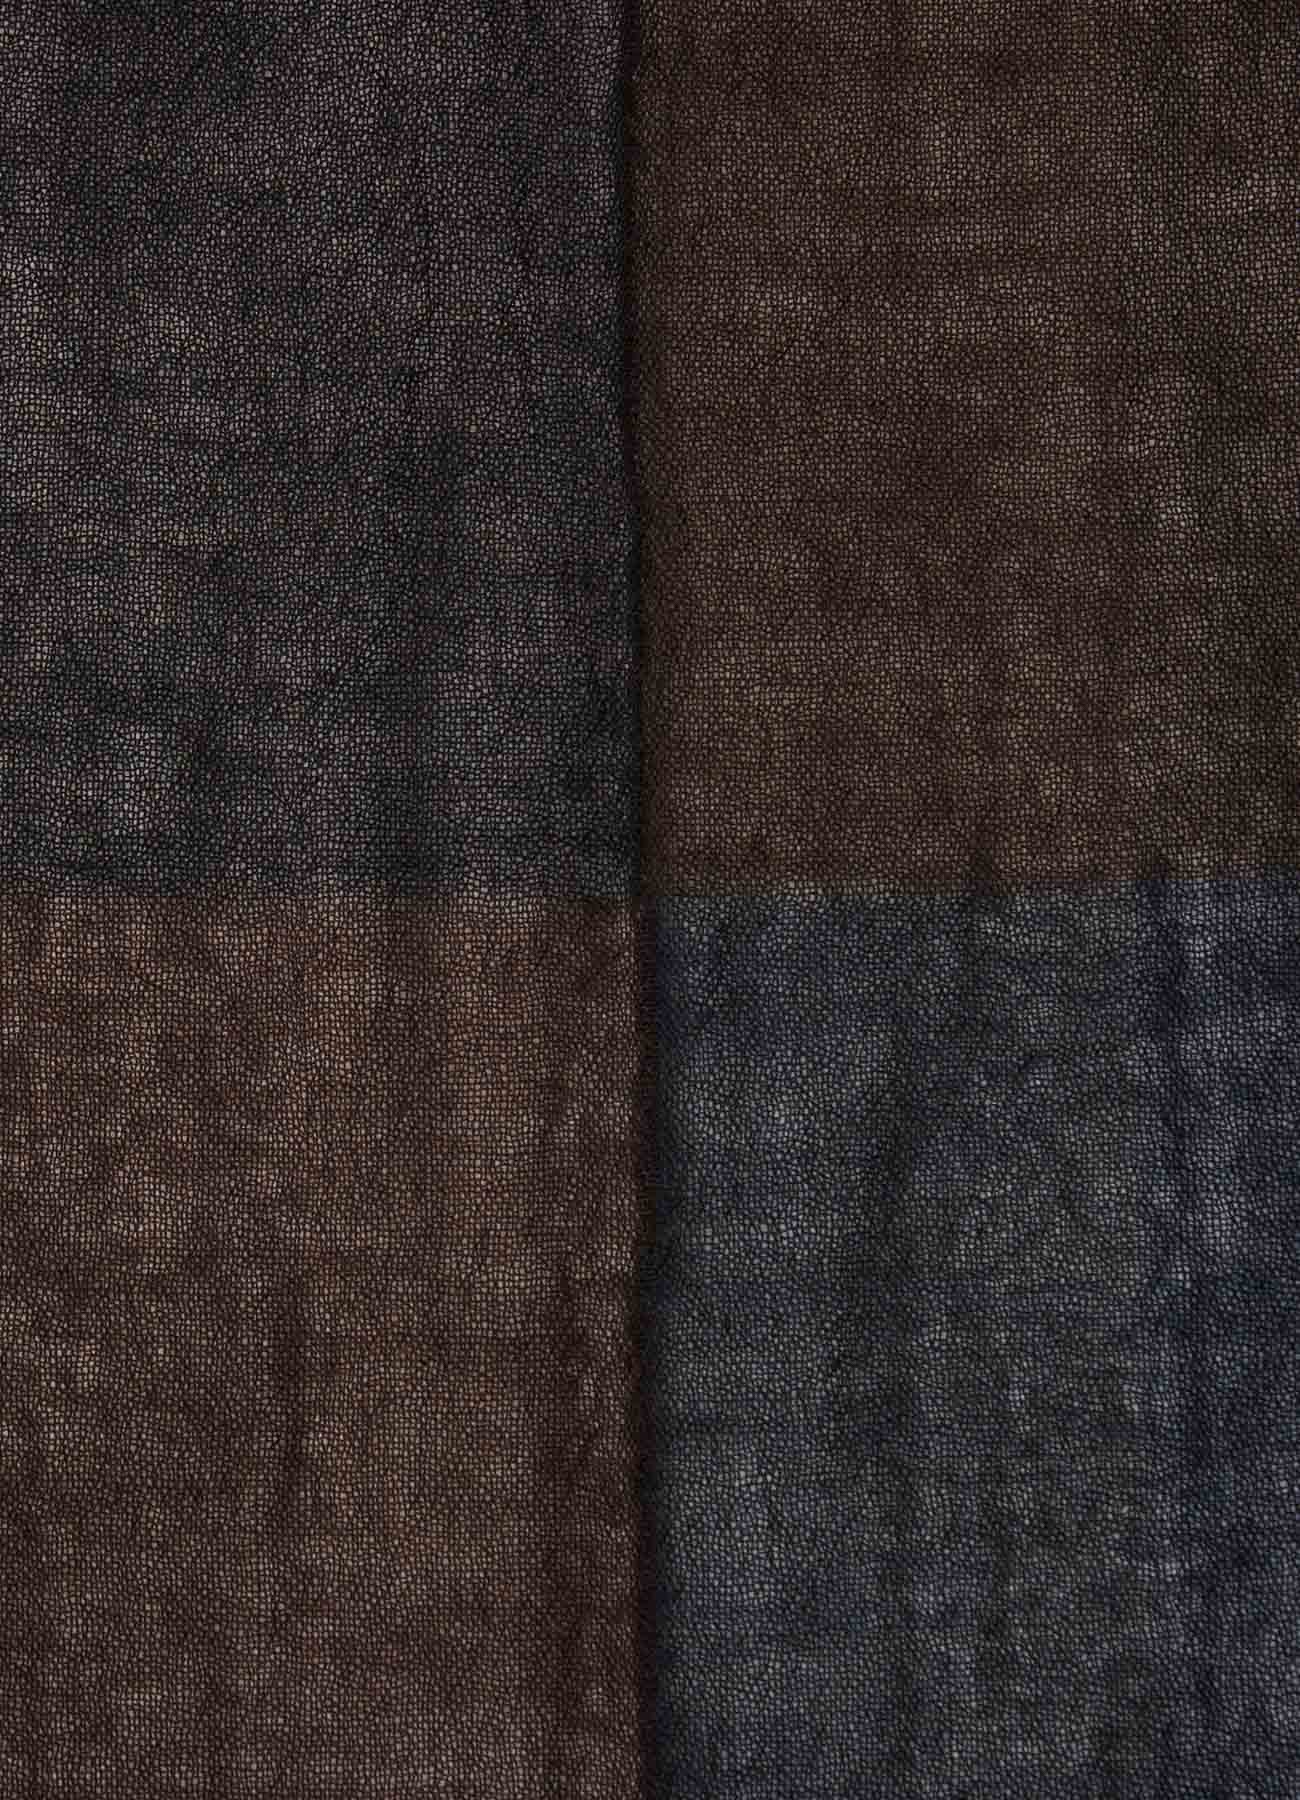 WOOL PLAIN WEAVE 2 PATCHES STOLE